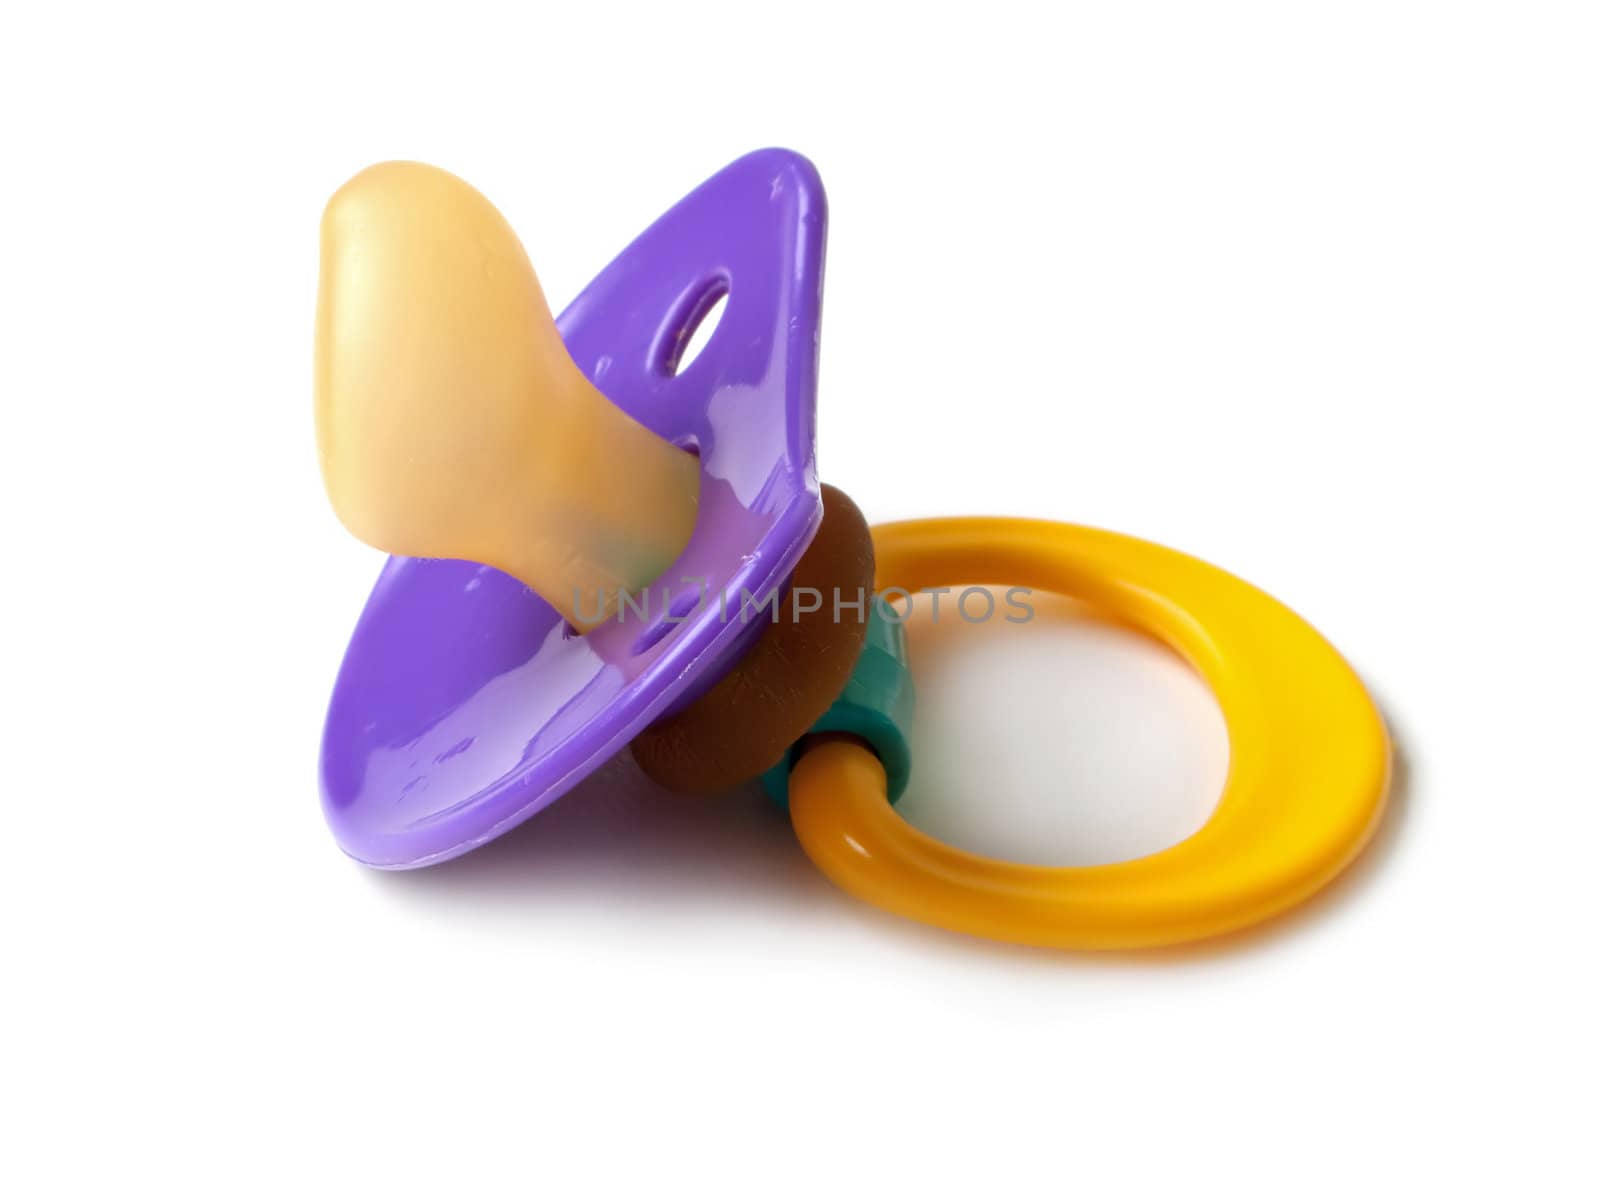 Plastic baby pacifier or soother isolated on white